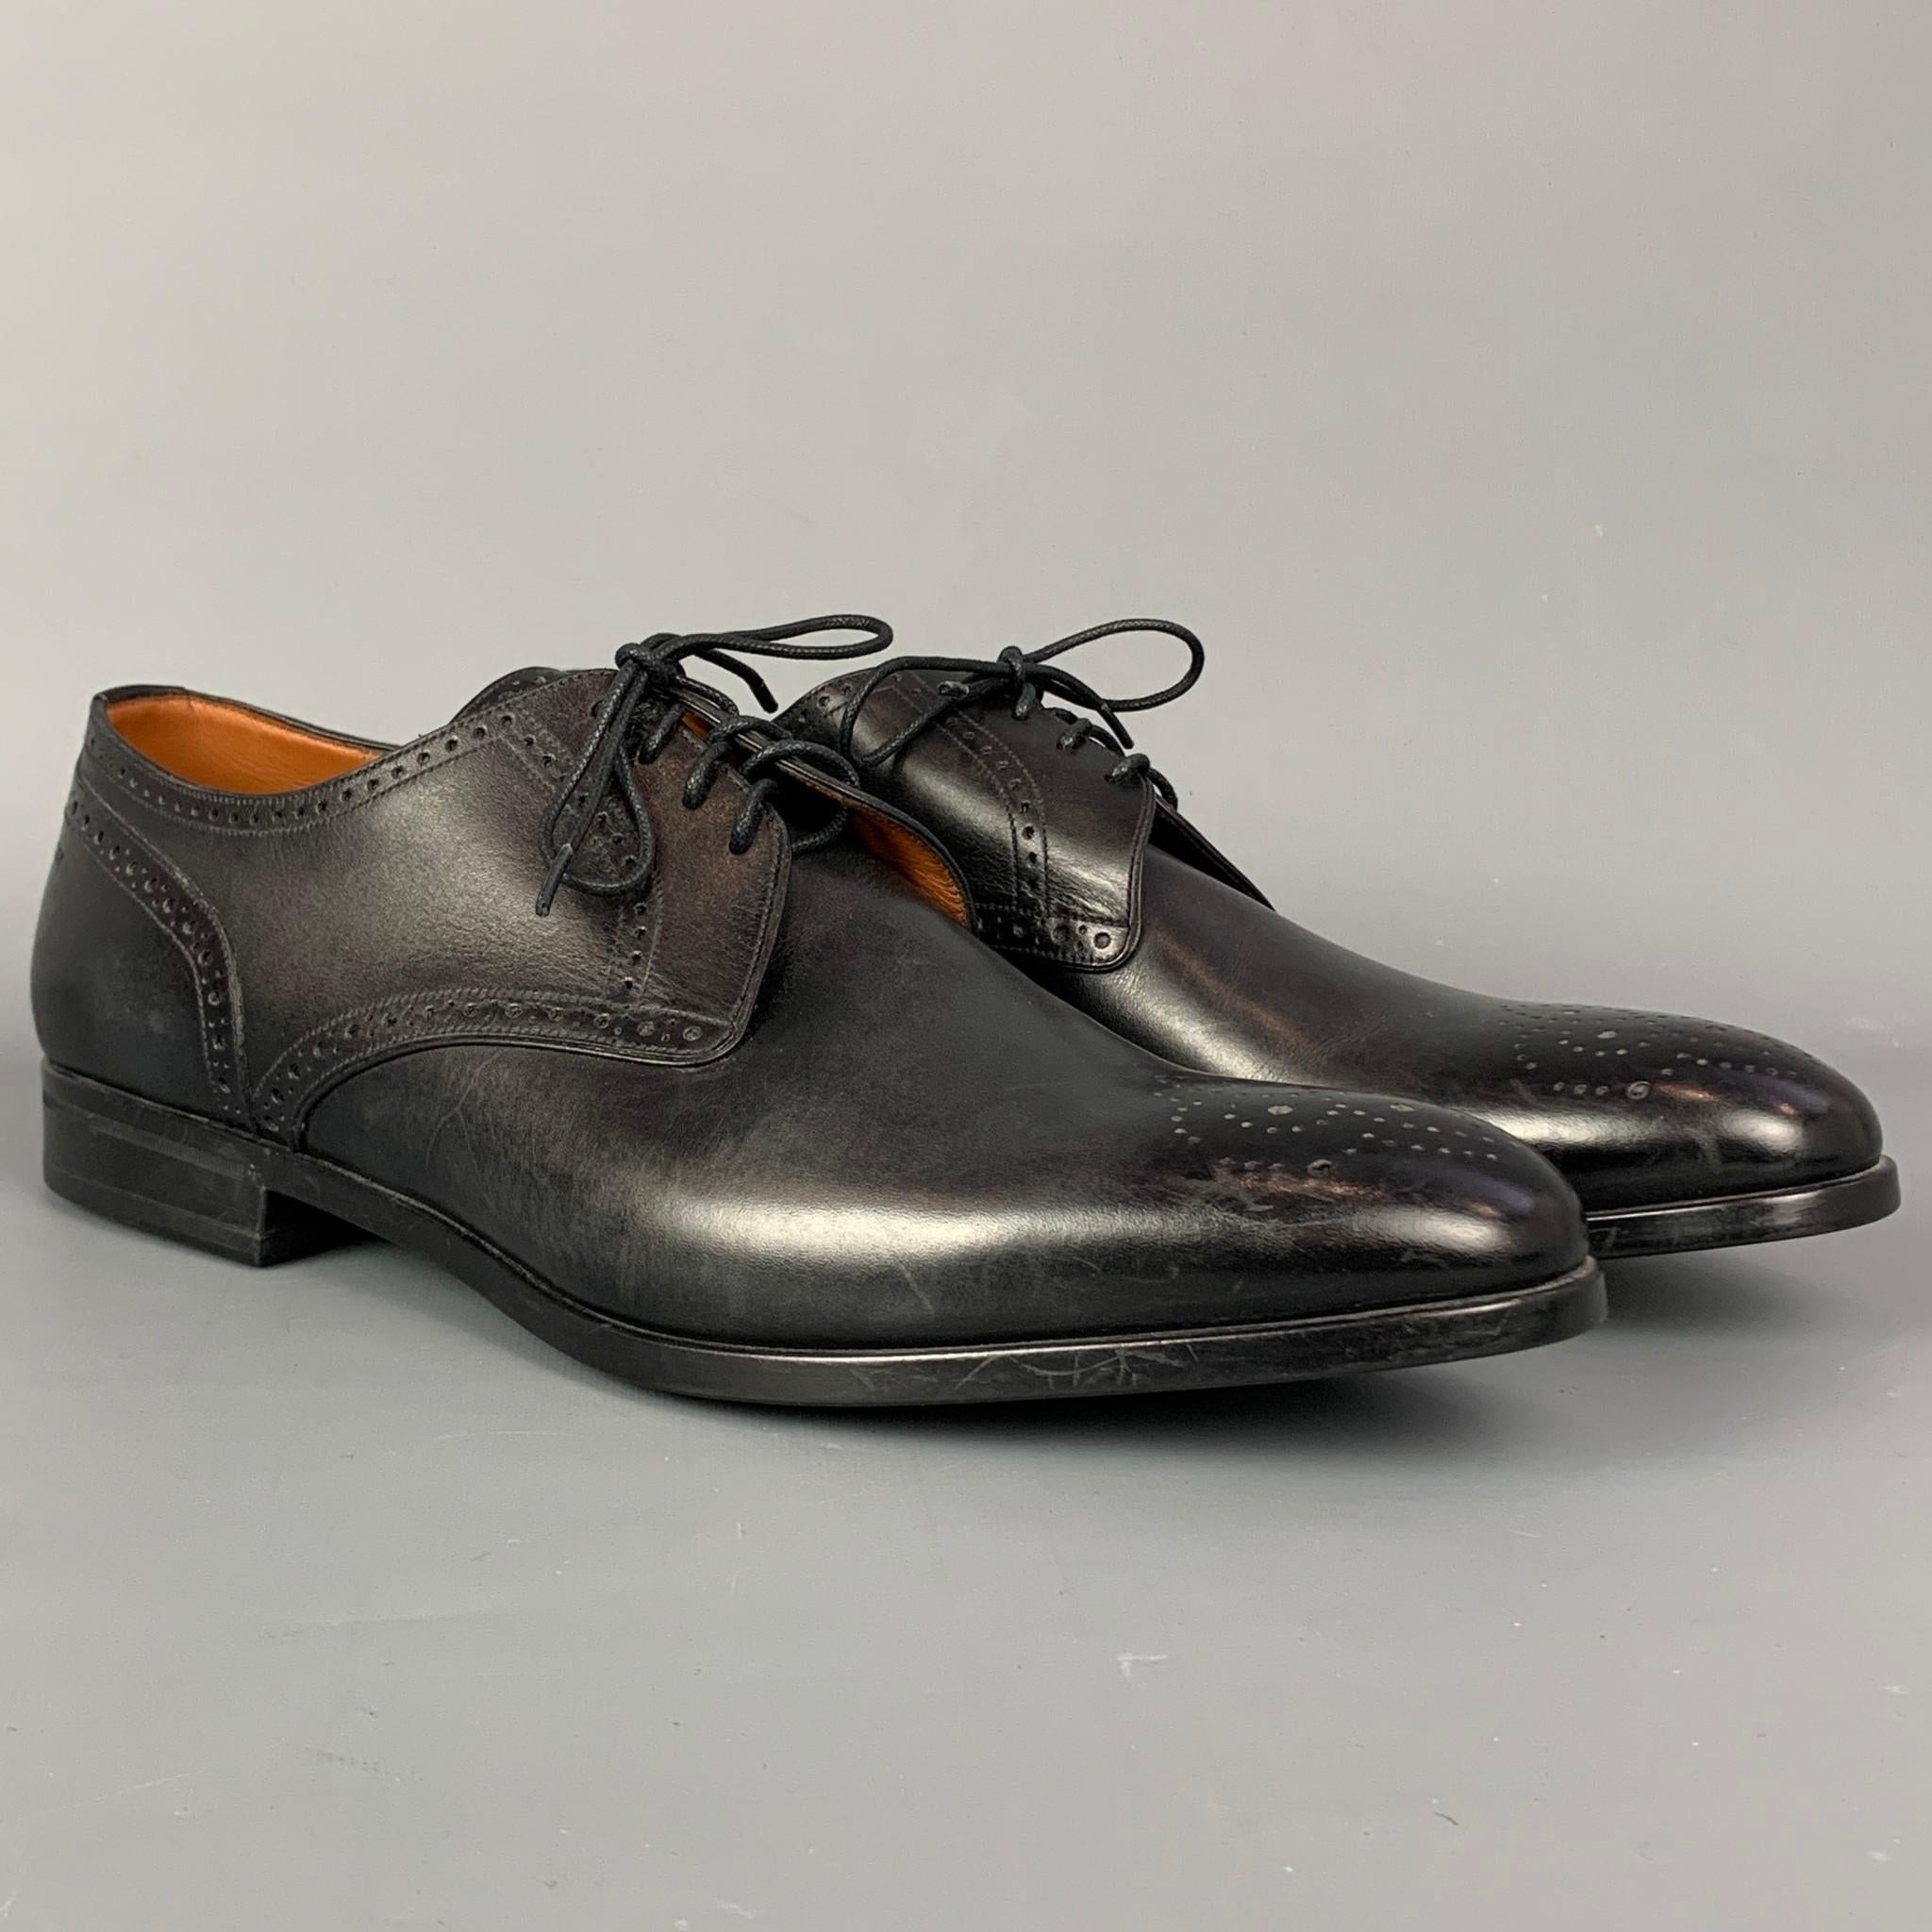 BALLY lace up shoes comes in a black perforated leather featuring a cap toe, rubber sole, and a lace up closure. Made in Switzerland.

Very Good Pre-Owned Condition.
Marked: EU 11 D / US 12 D

Outsole:

12.5 in. x 4 in.

SKU: 110021
Category: Lace